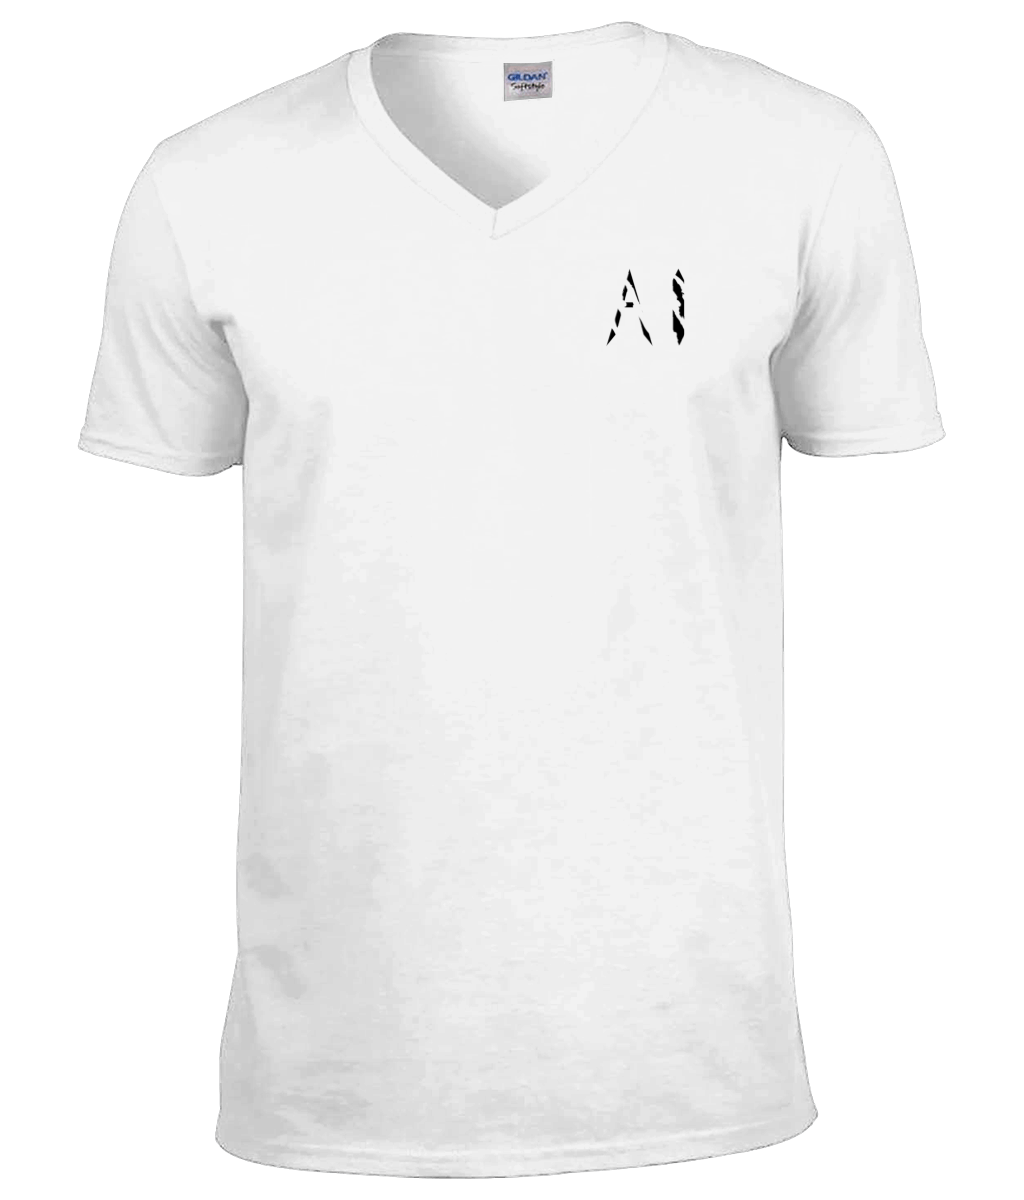 Womens white Classic V Neck T-Shirt with black AI logo on left breast